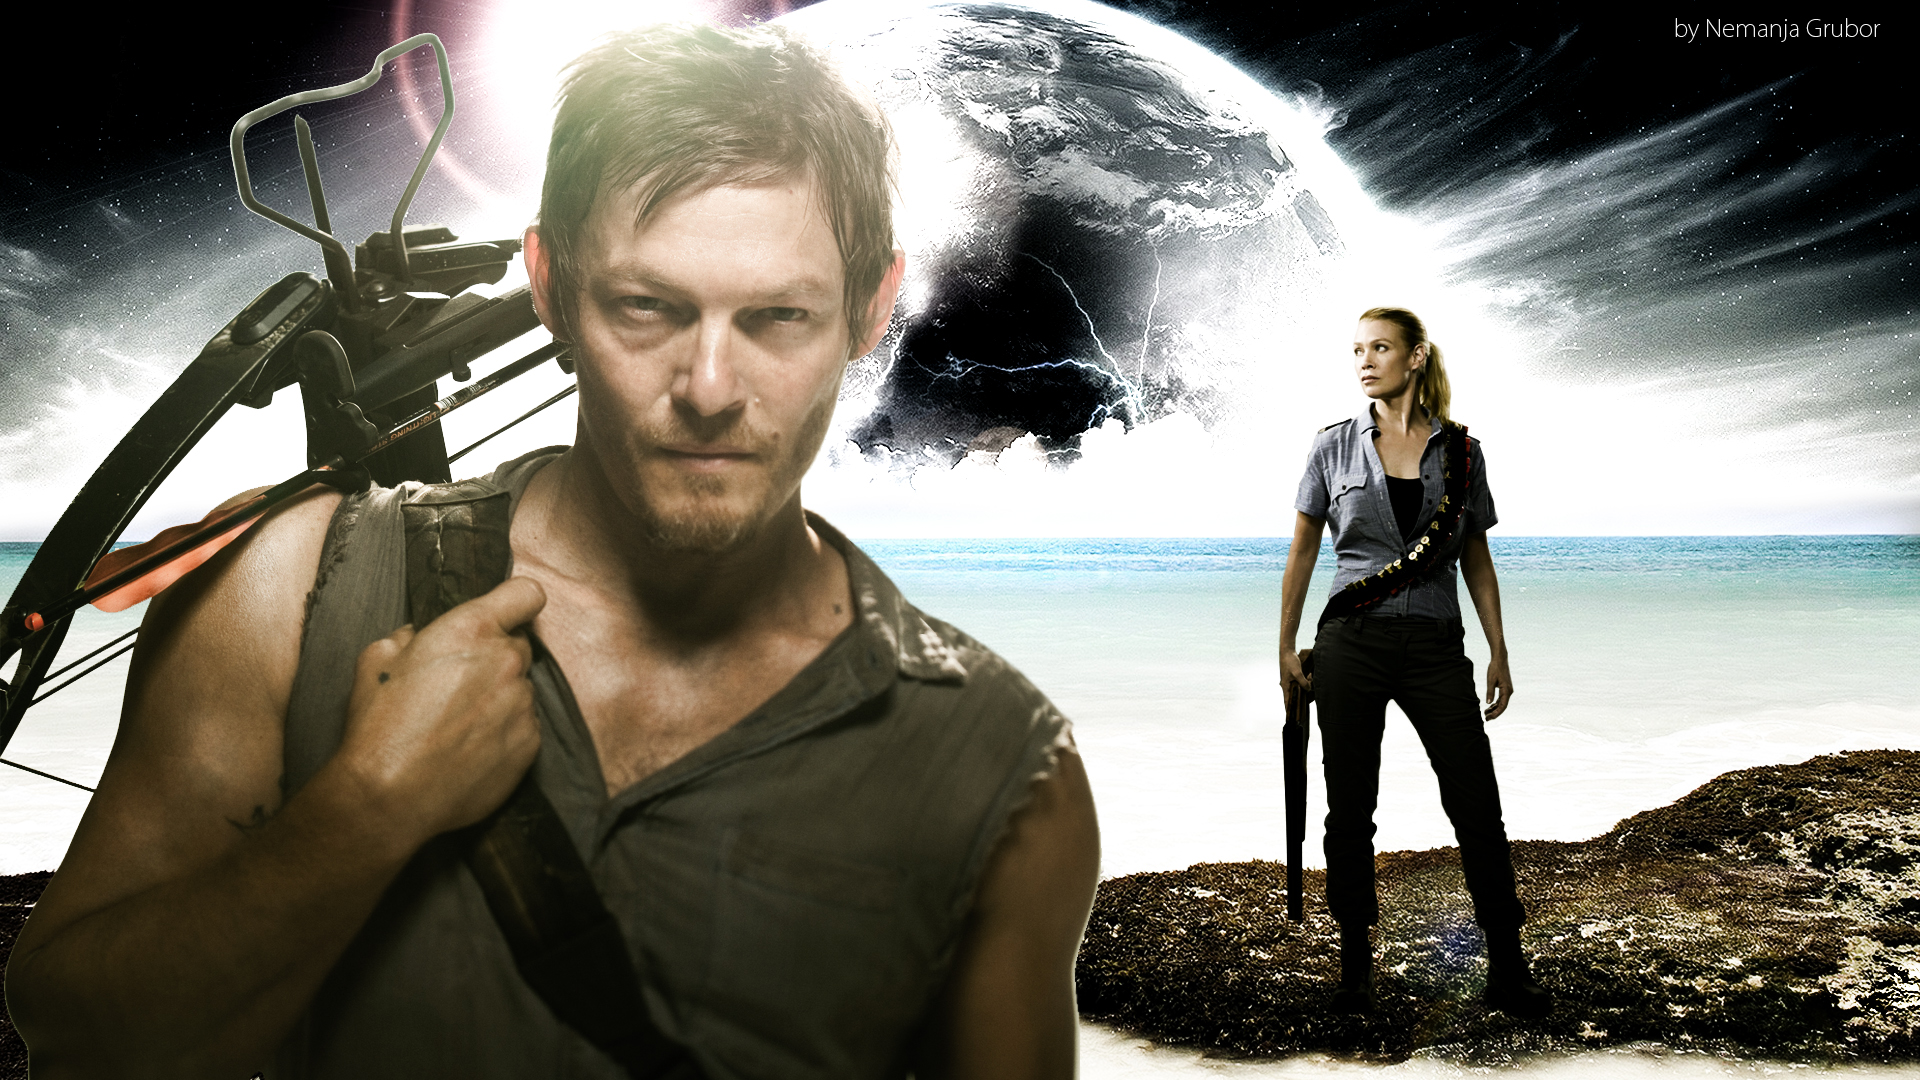 ... The Walking Dead Daryl & Andrea wallpaper by ngrubor